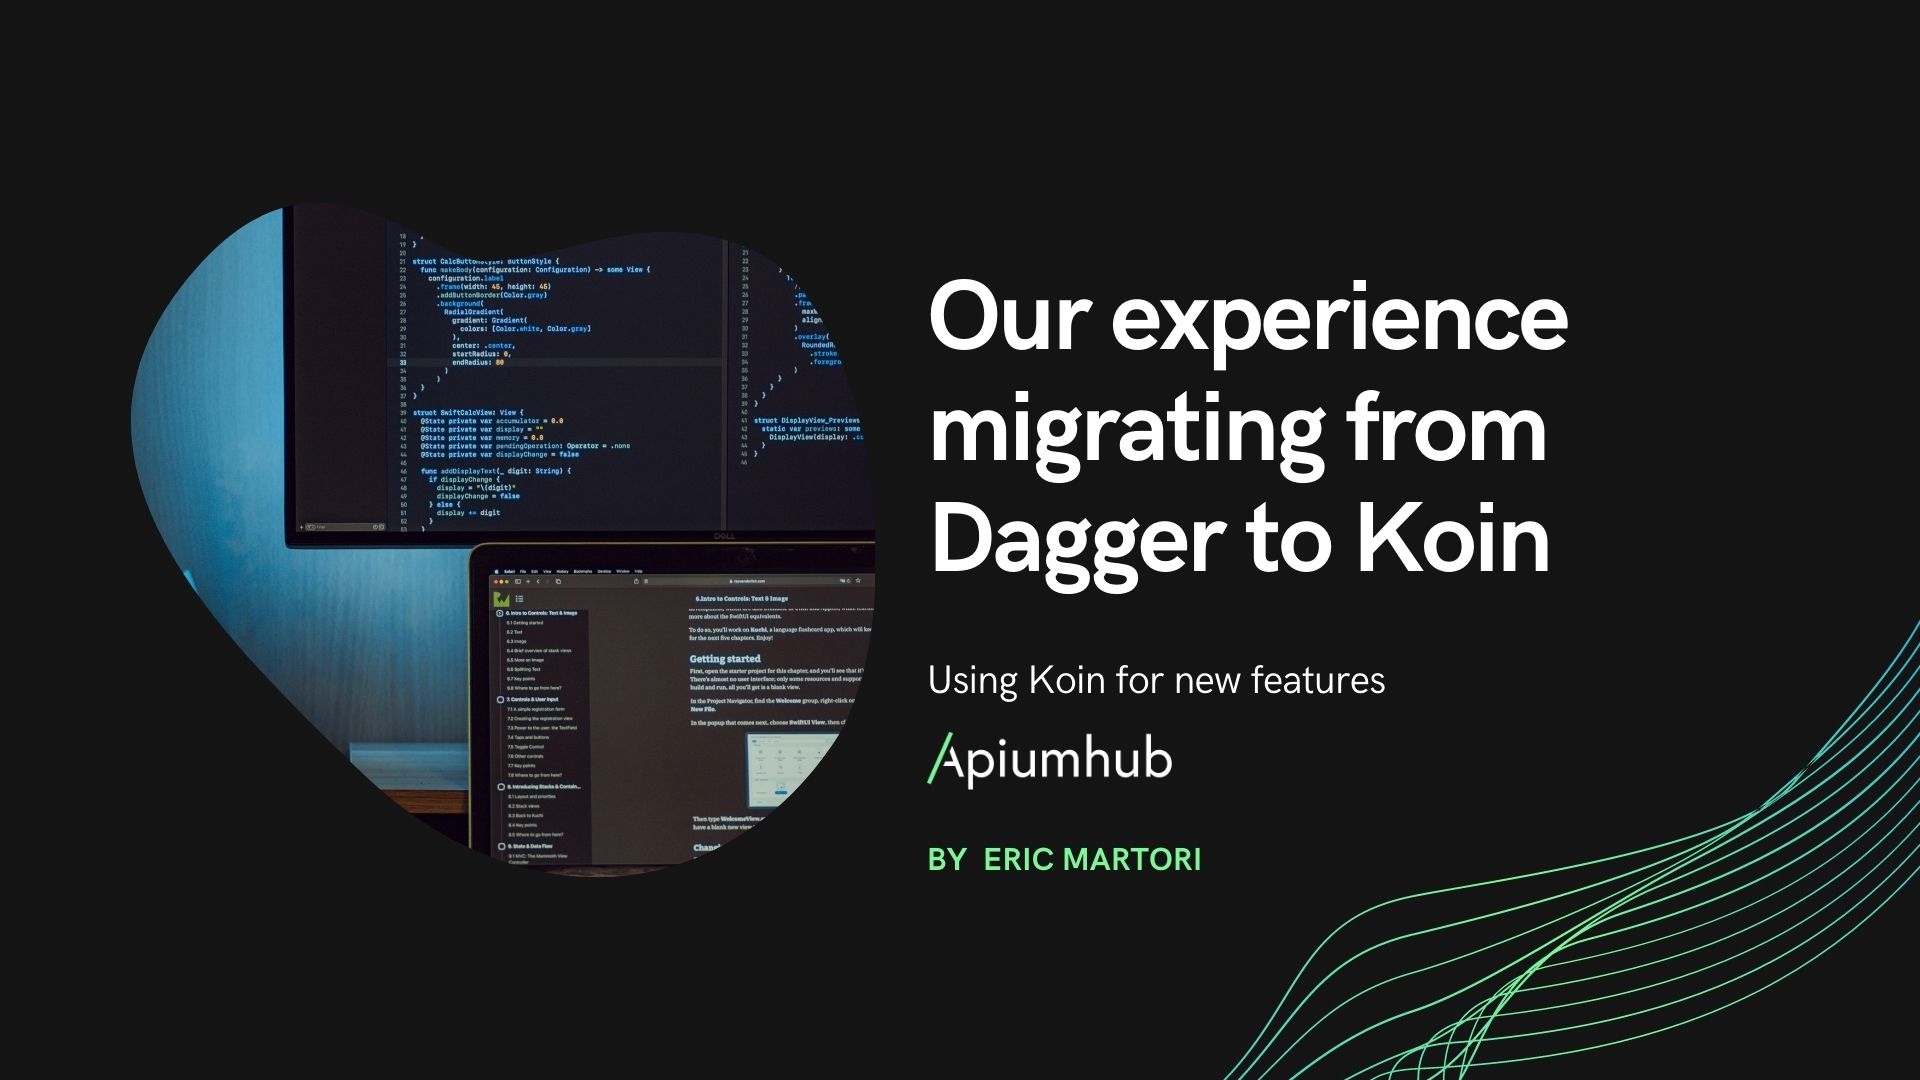 Our experience migrating from Dagger to Koin